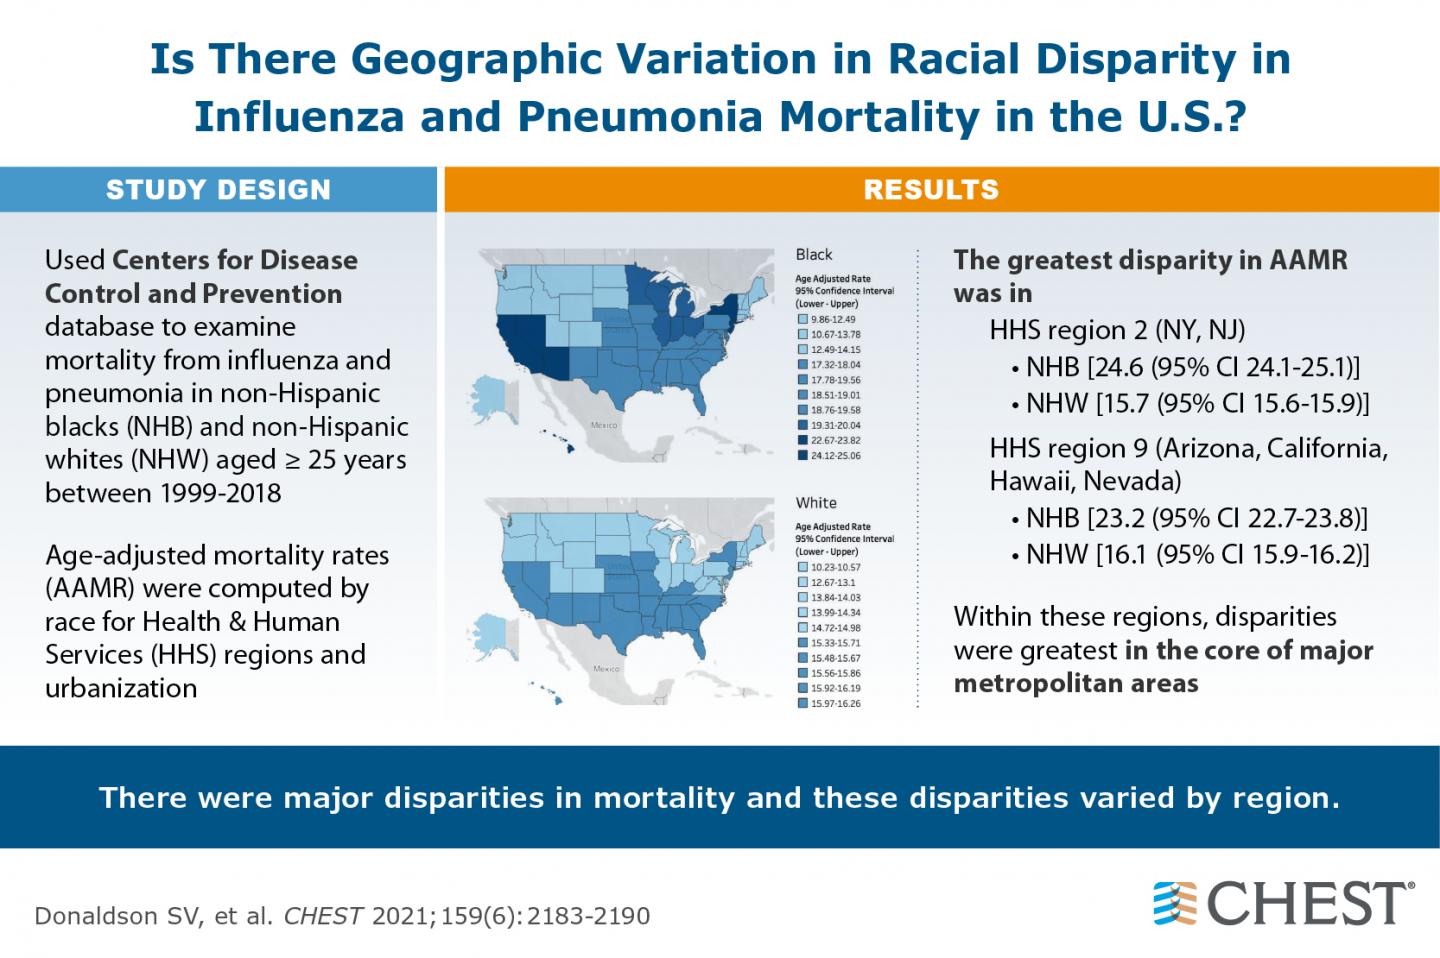 Is There Geographic Variation in Racial Disparity in Influenza and Pneumonia Mortality in the U.S.